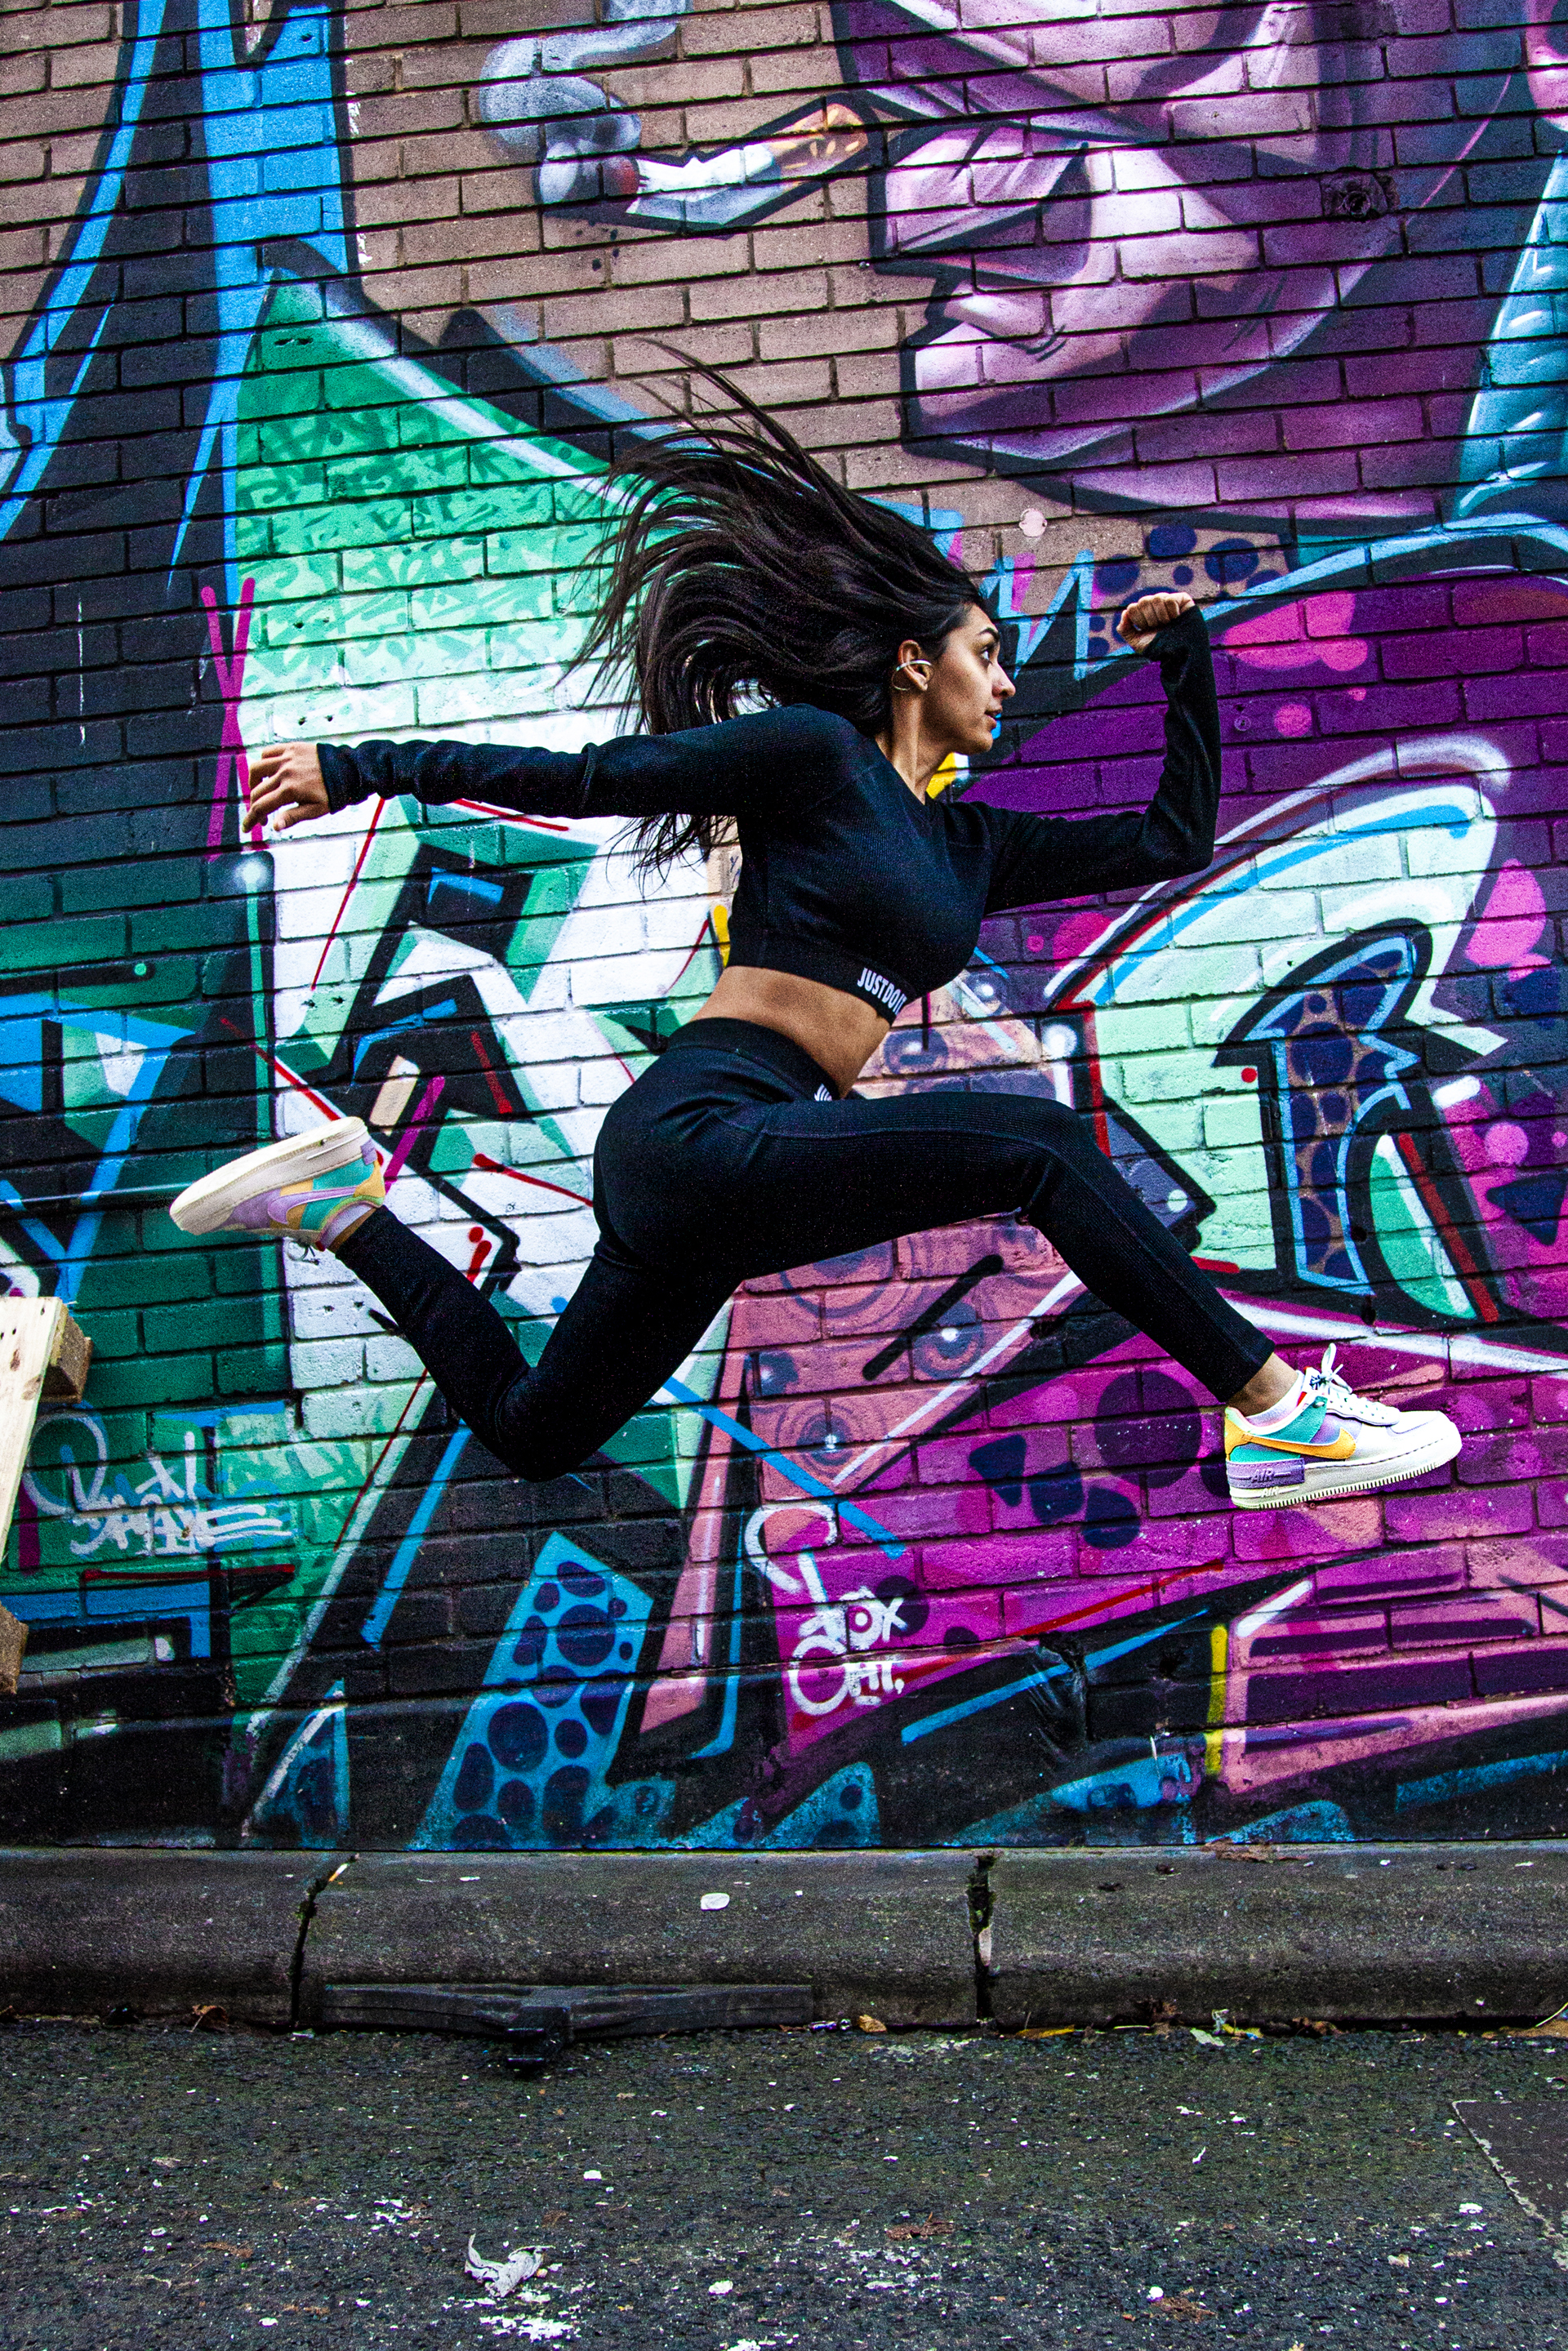 Global majority female dancer jumping in a running pose side on with long black hair swishing behind. Wearing black leggings and long sleeve black top in front of purple graffiti wall